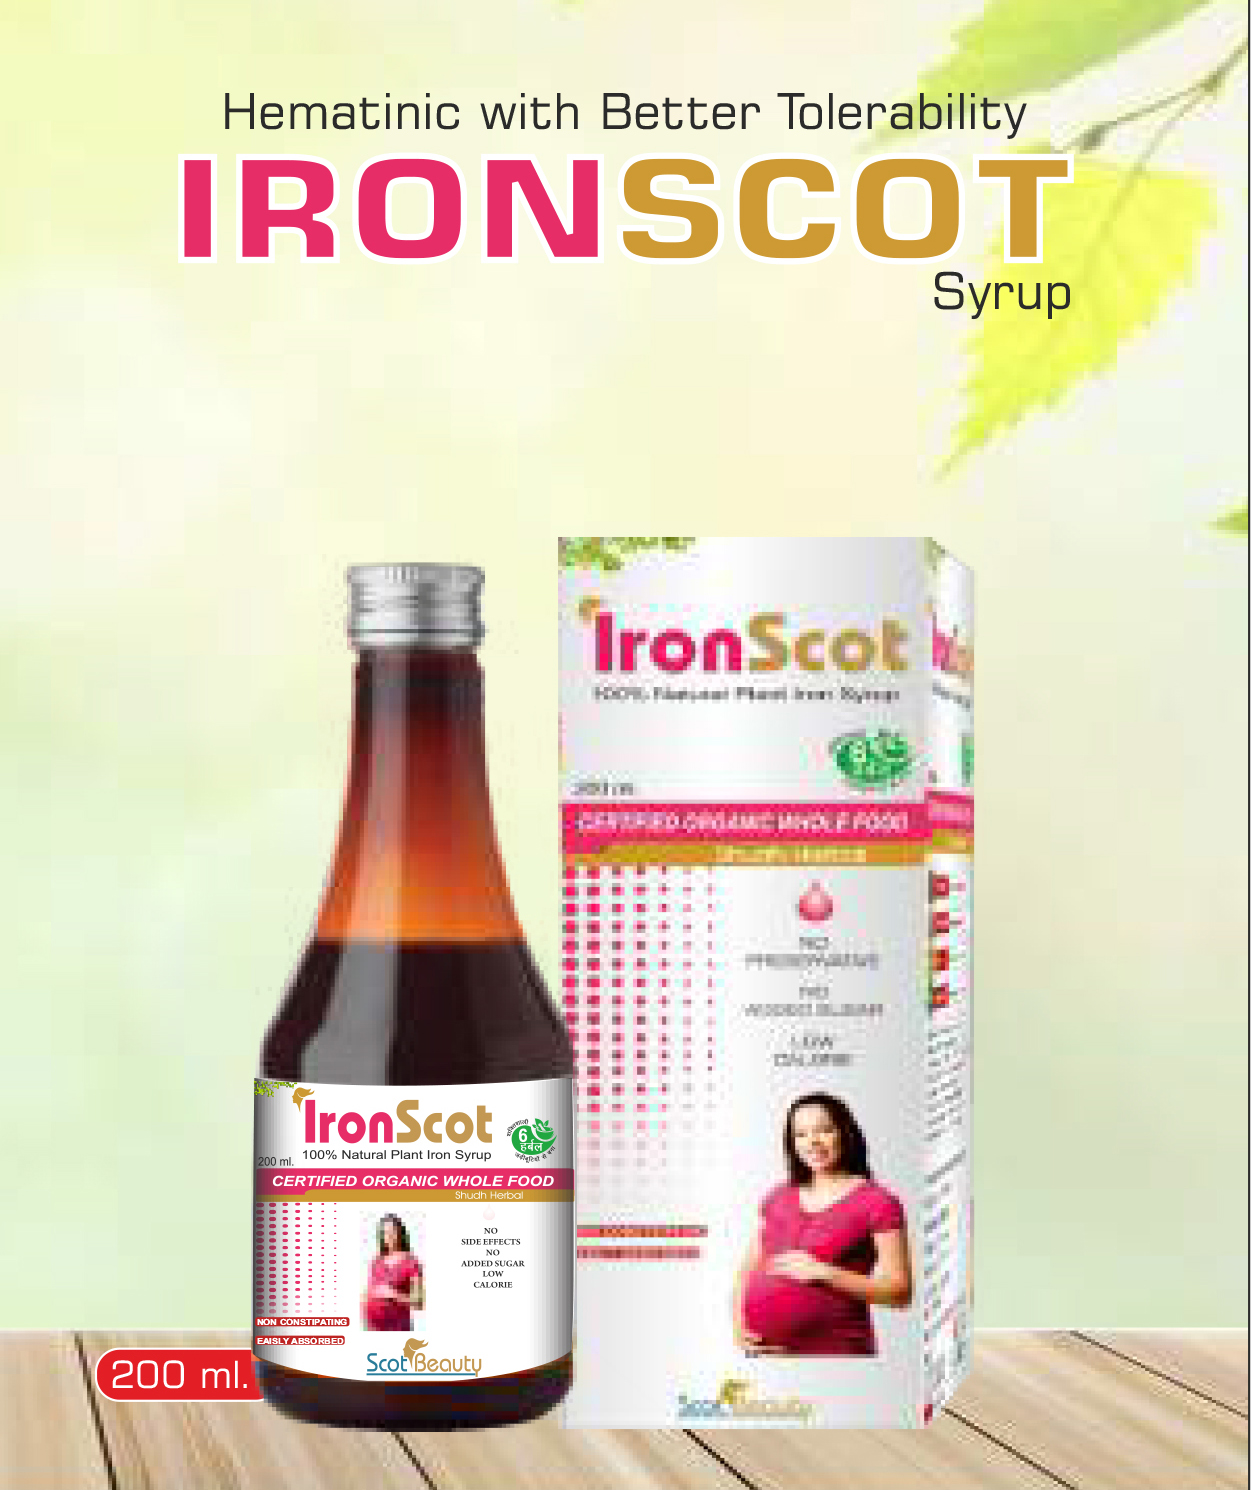 Product Name: IronScot, Compositions of IronScot are Hematinic with Better Tolerability - Scothuman Lifesciences